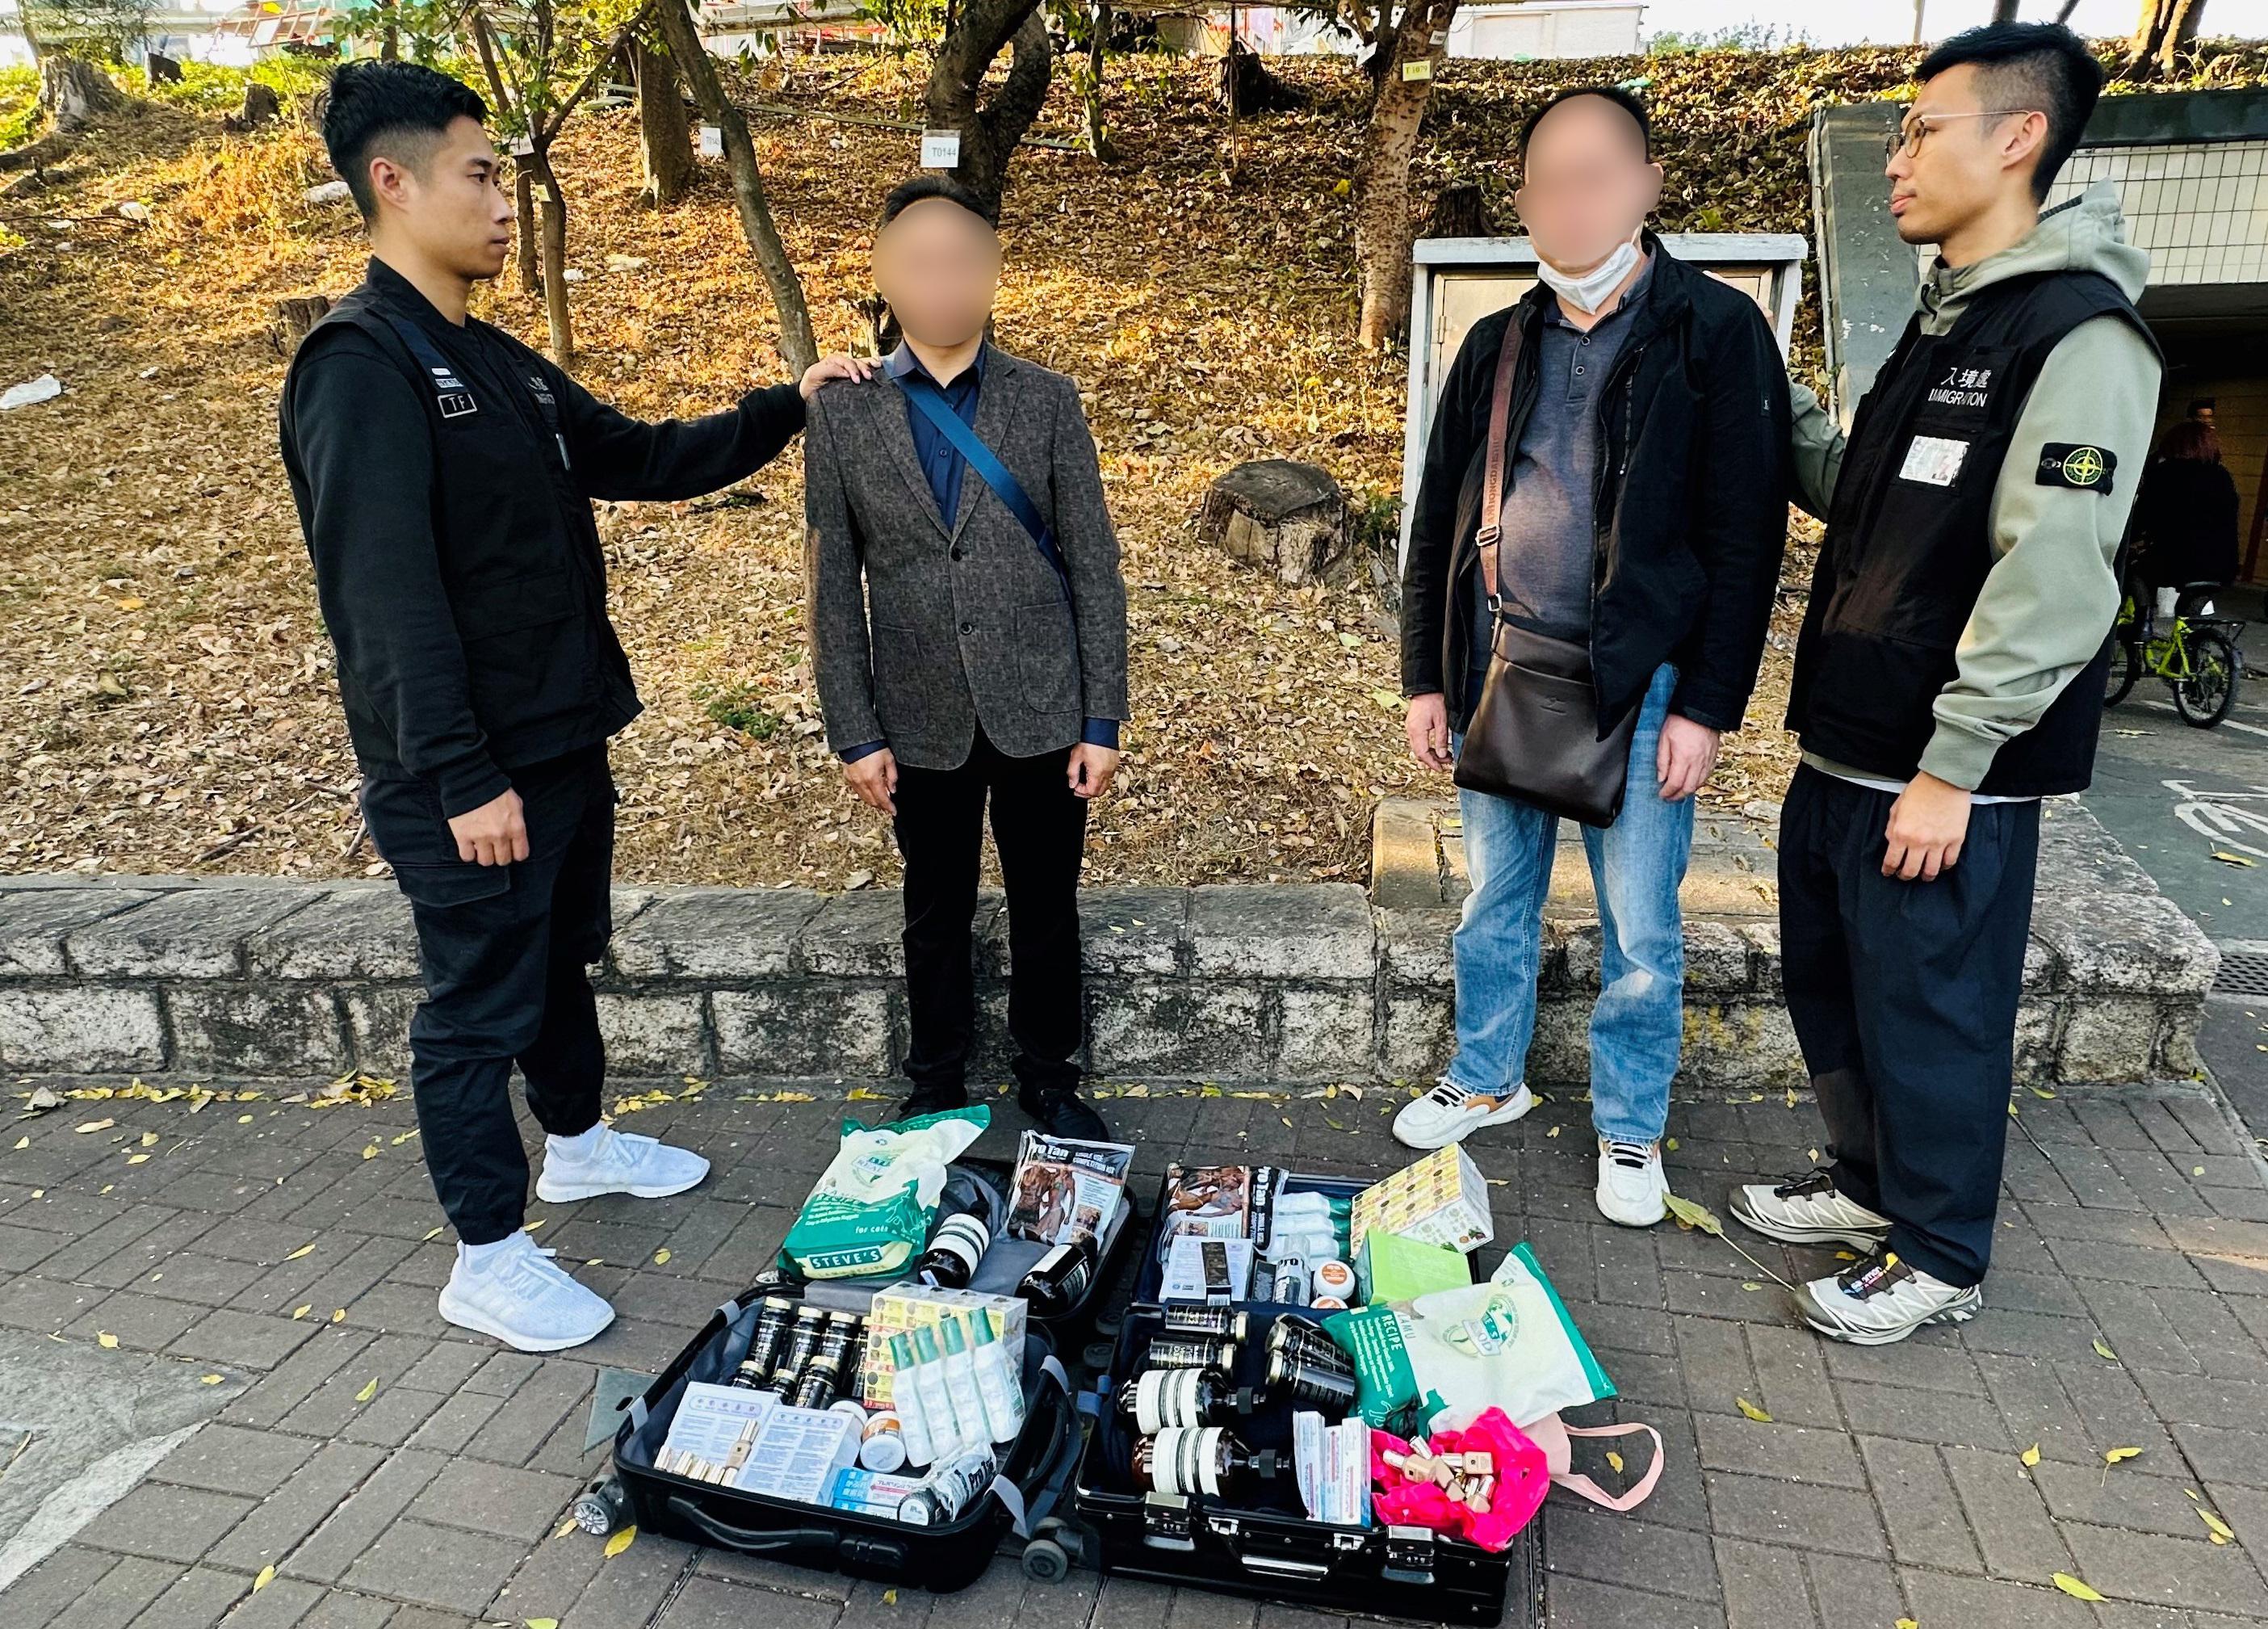 The Immigration Department mounted a series of territory-wide anti-illegal worker operations codenamed "Greenlane", "Lightshadow", "Twilight", a joint operation with the Hong Kong Police Force and Labour Department codenamed "Powerplayer" and joint operations with the Hong Kong Police Force codenamed "Windsand" for four consecutive days from January 8 to yesterday (January 11). Photo shows Mainland visitors involved in suspected parallel trading activities and their goods.